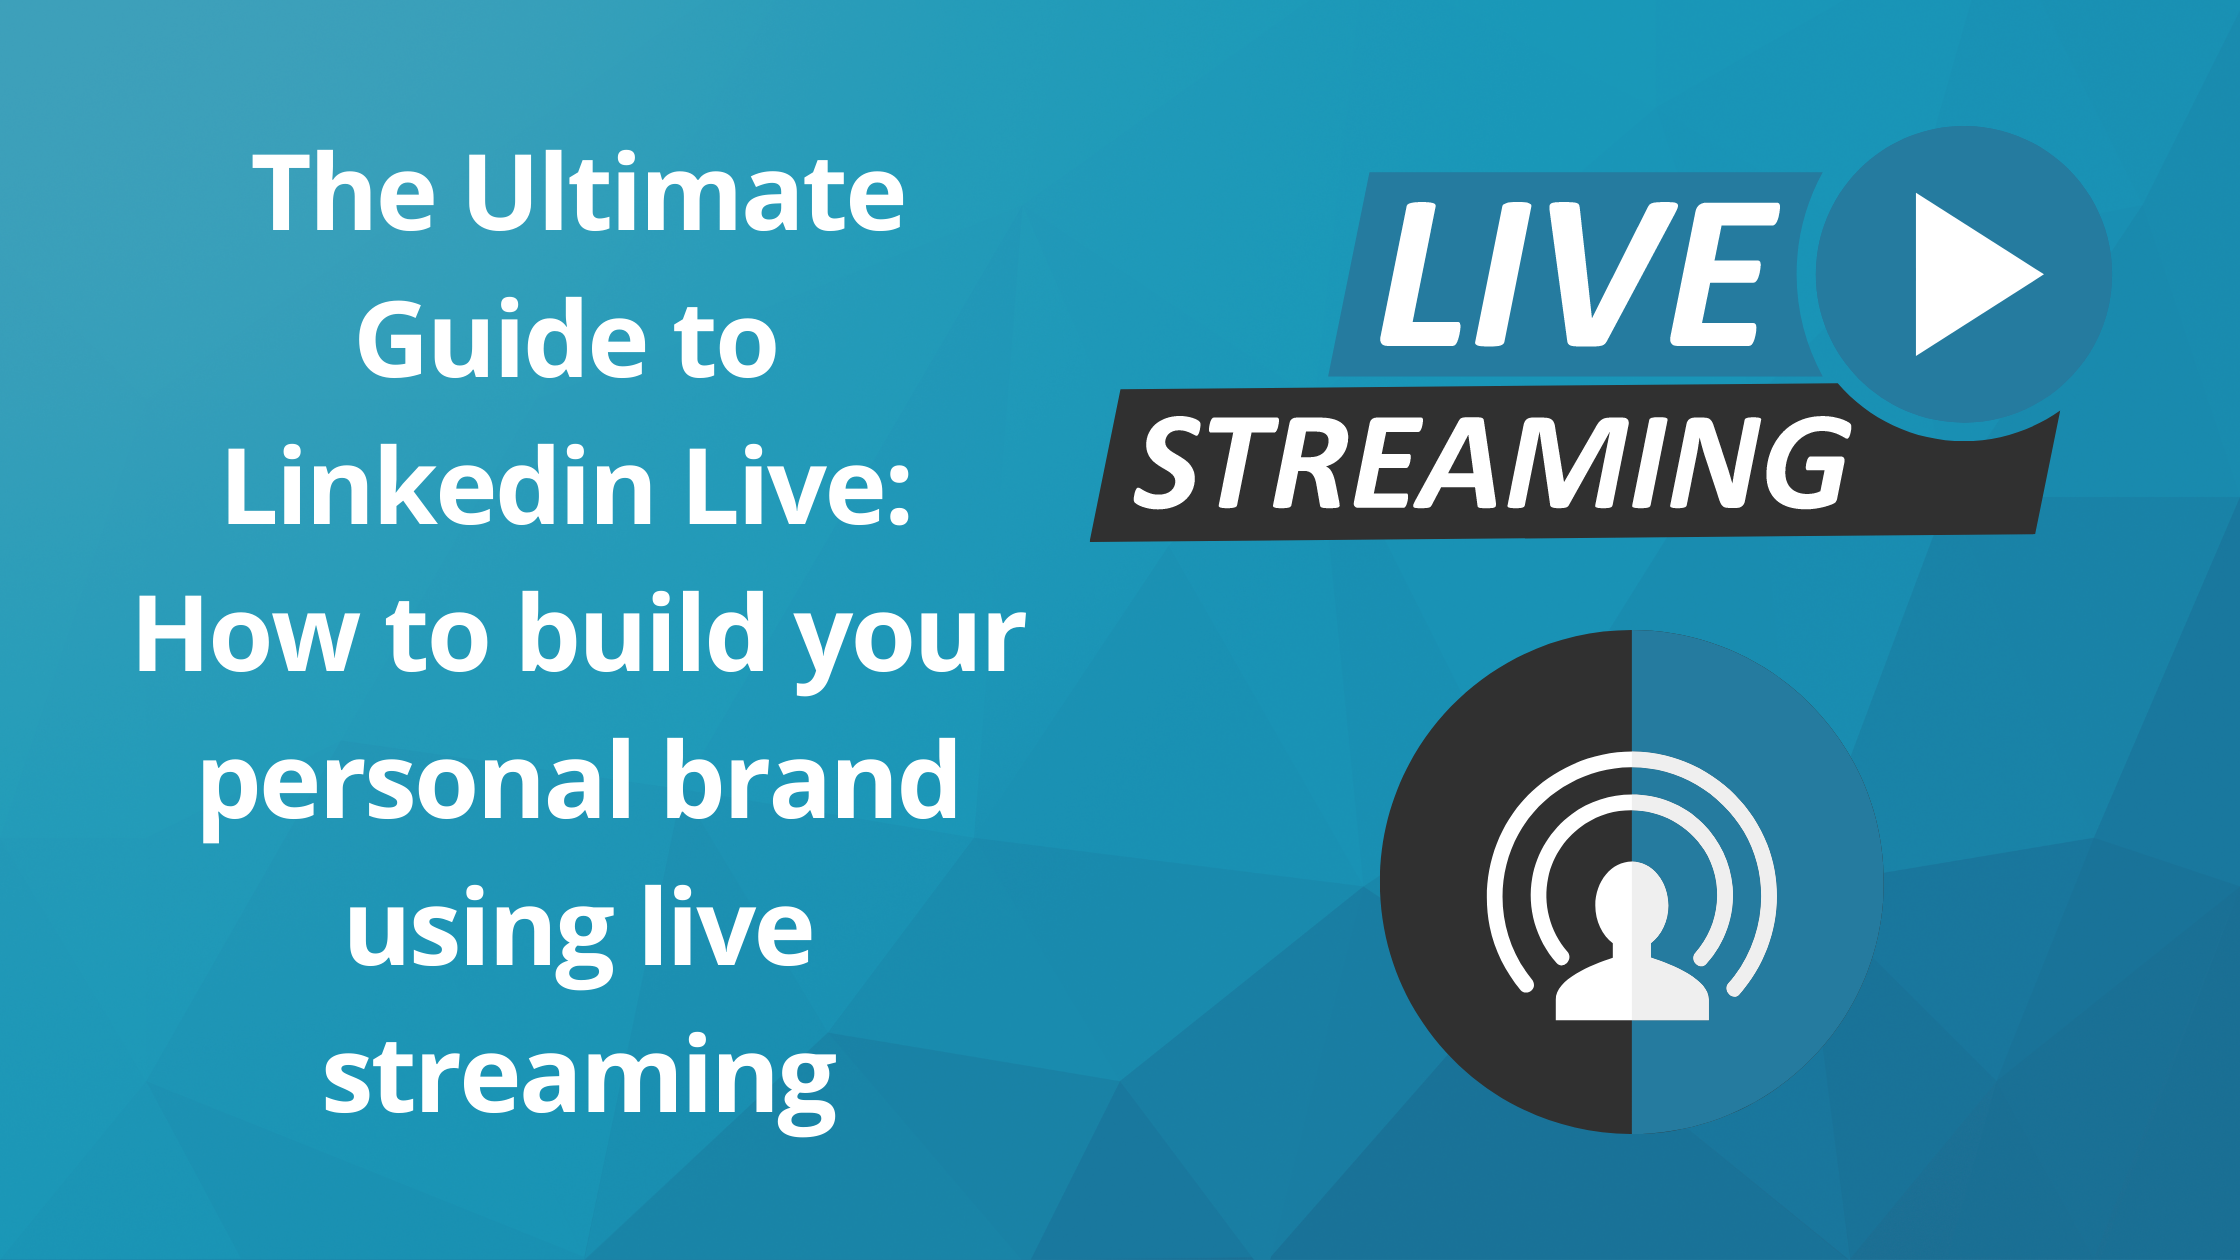 The ultimate guide to live streaming